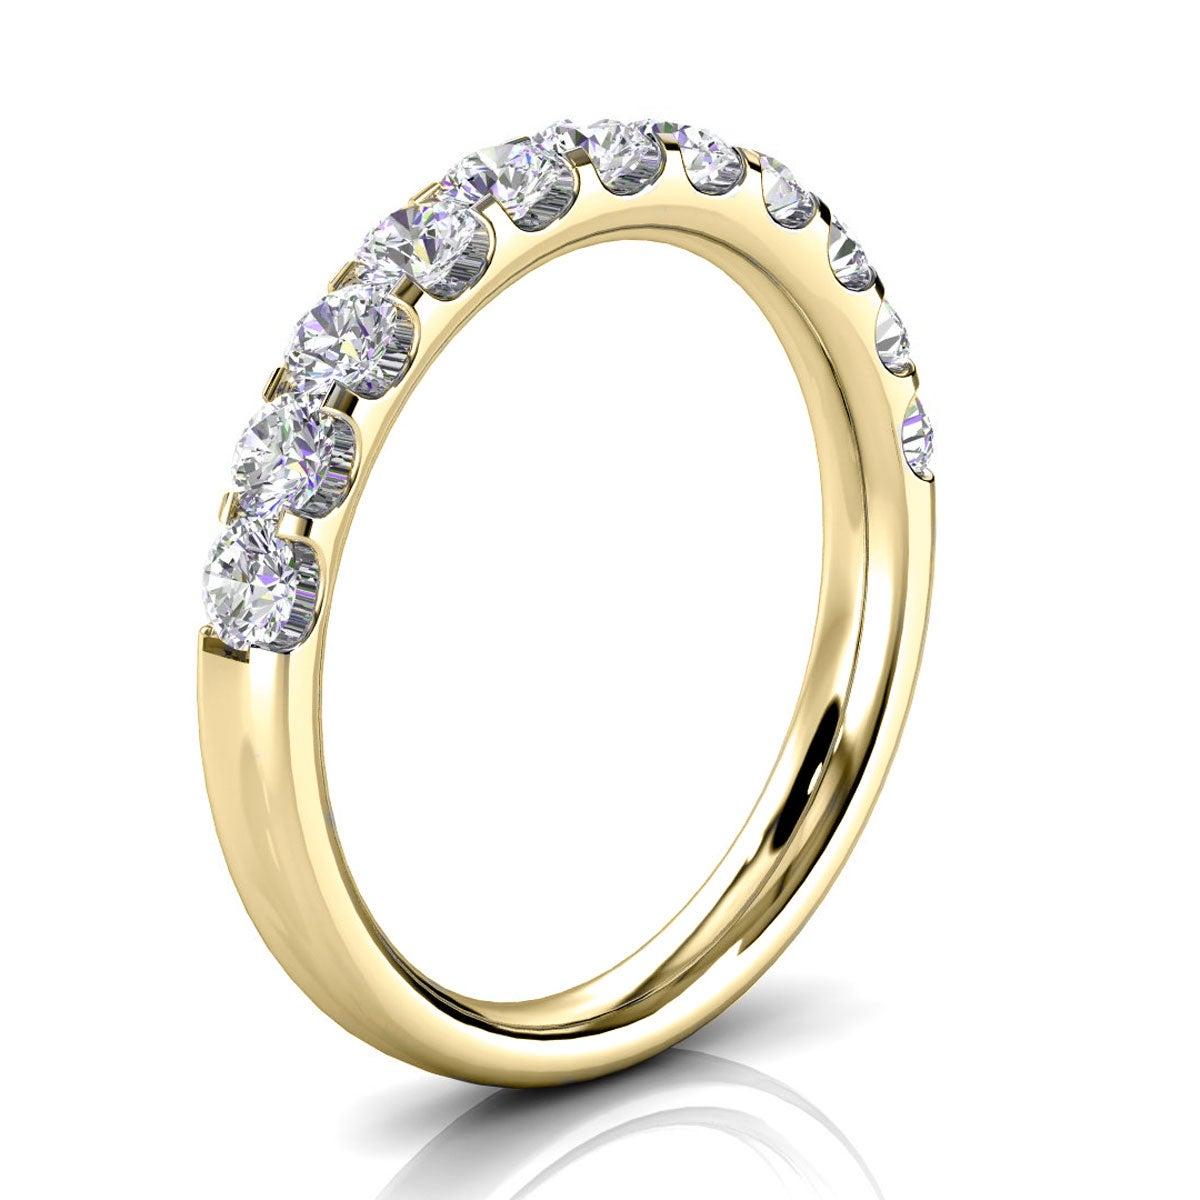 For Sale:  18K Yellow Gold Valerie Micro-Prong Diamond Ring '3/4 Ct. Tw' 2